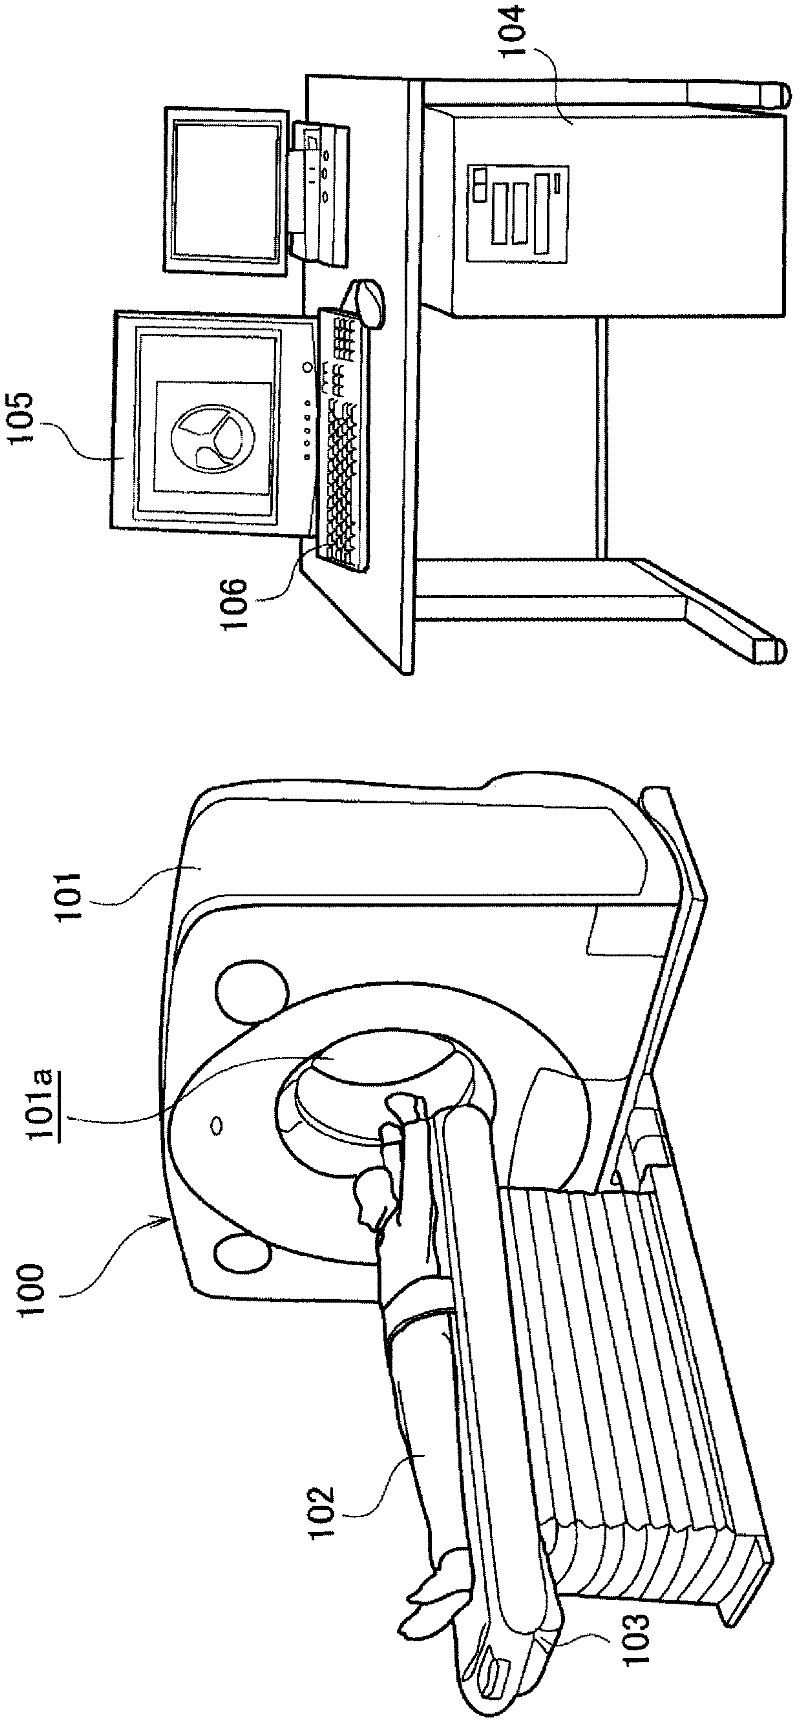 Bed for medical imaging apparatus